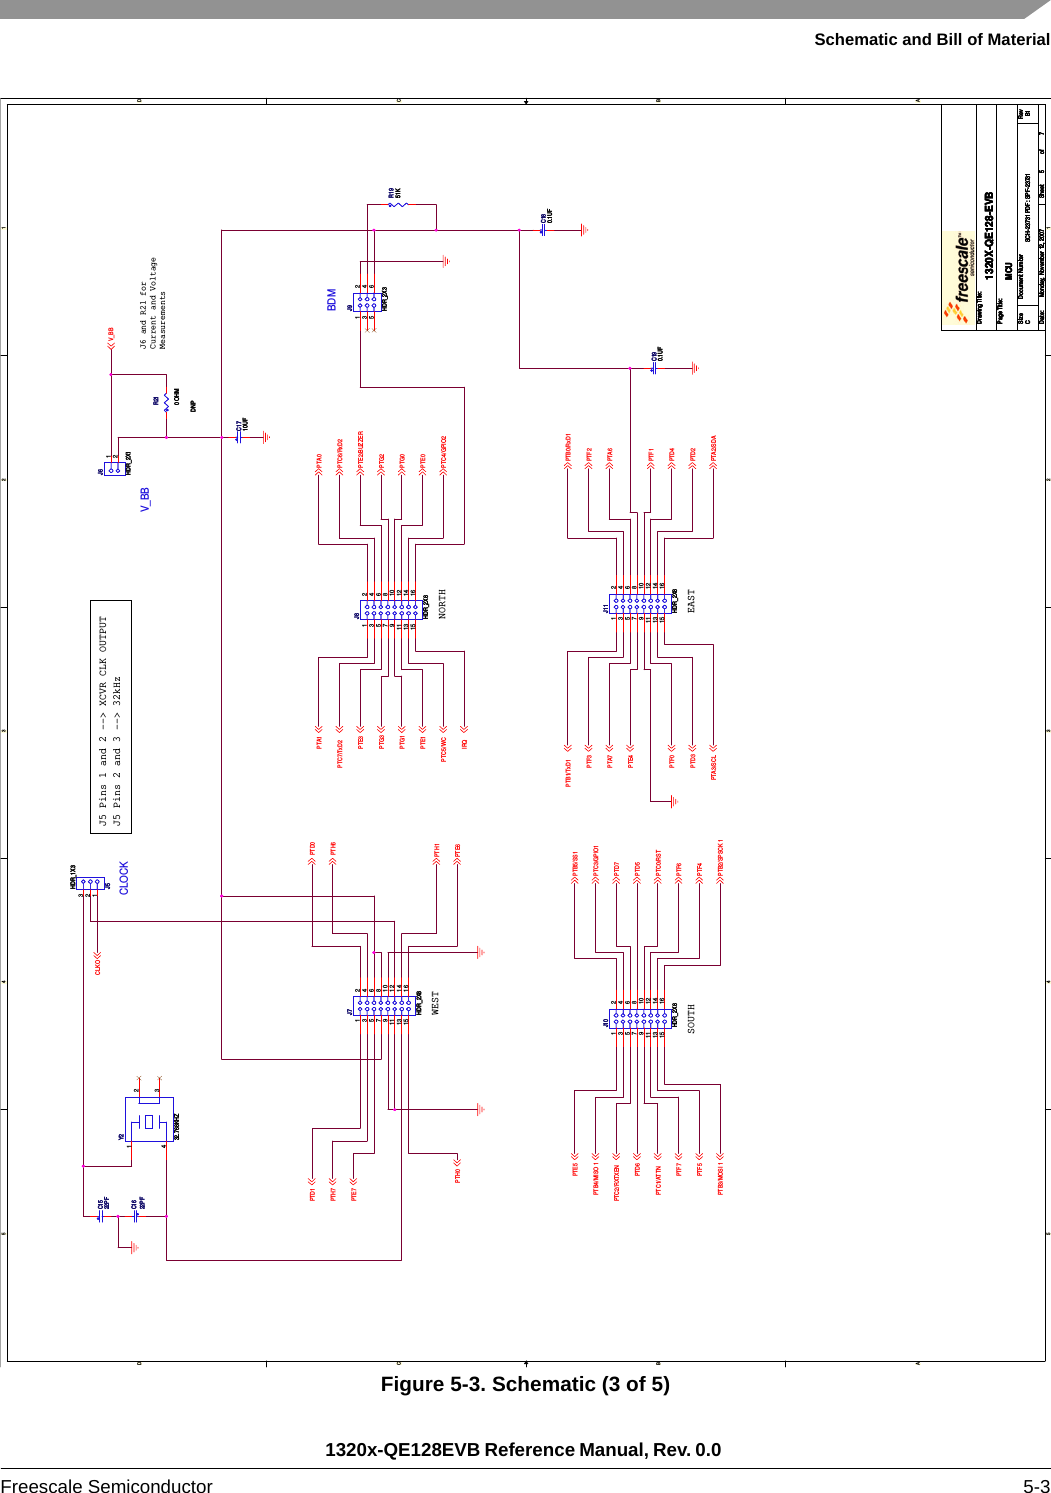 Schematic and Bill of Material1320x-QE128EVB Reference Manual, Rev. 0.0 Freescale Semiconductor 5-3Figure 5-3. Schematic (3 of 5)5544332211D DC CB BA APTD1PTH7PTE7PTH0PTE5PTB4/MISO 1PTC2/RXTXENPTD6PTC1/ATTNPTF7PTF5PTB3/MOSI 1PTA1PTC7/TxD2PTE3PTG3PTG1PTE1PTC5/WCIRQPTD0PTH6CLKOPTH1PTE6PTB5/SS1PTC3/GPIO1PTD7PTD5PTC0/RSTPTF6PTF4PTB2/SPSCK 1PTA0PTC6/RxD2PTE2/BUZZERPTG2PTG0PTE0PTC4/GPIO2PTB1/TxD1PTF3PTA7PTE4PTF0PTD3PTA3/SCLPTB0/RxD1PTF2PTA6PTF1PTD4PTD2PTA2/SDAV_BBDrawing Title:Size Document Number RevDate: Sheet ofPage Title:SCH-23731 PDF: SPF-23731 B11320X-QE128-EVBCMonday, November 12, 2007MCU57Drawing Title:Size Document Number RevDate: Sheet ofPage Title:SCH-23731 PDF: SPF-23731 B11320X-QE128-EVBCMonday, November 12, 2007MCU57Drawing Title:Size Document Number RevDate: Sheet ofPage Title:SCH-23731 PDF: SPF-23731 B11320X-QE128-EVBCMonday, November 12, 2007MCU57WEST NORTHSOUTHJ5 Pins 1 and 2 --&gt; XCVR CLK OUTPUTJ5 Pins 2 and 3 --&gt; 32kHzEASTBDMV_BBCLOCKJ6 and R21 forCurrent and VoltageMeasurementsR1951KR1951KJ10HDR_2X8J10HDR_2X81 23 4657 891011 1213 1415 16J11HDR_2X8J11HDR_2X81 23 4657 891011 1213 1415 16J9HDR_2X3J9HDR_2X31 23 465J6HDR_2X1J6HDR_2X112R210 OHMDNPR210 OHMDNPJ5HDR_1X3J5HDR_1X3123C1522PFC1522PFC1710UFC1710UFC190.1UFC190.1UFJ7HDR_2X8J7HDR_2X81 23 4657 891011 1213 1415 16J8HDR_2X8J8HDR_2X81 23 4657 891011 1213 1415 16C180.1UFC180.1UFC1622PFC1622PFY232.768KHZY232.768KHZ1423